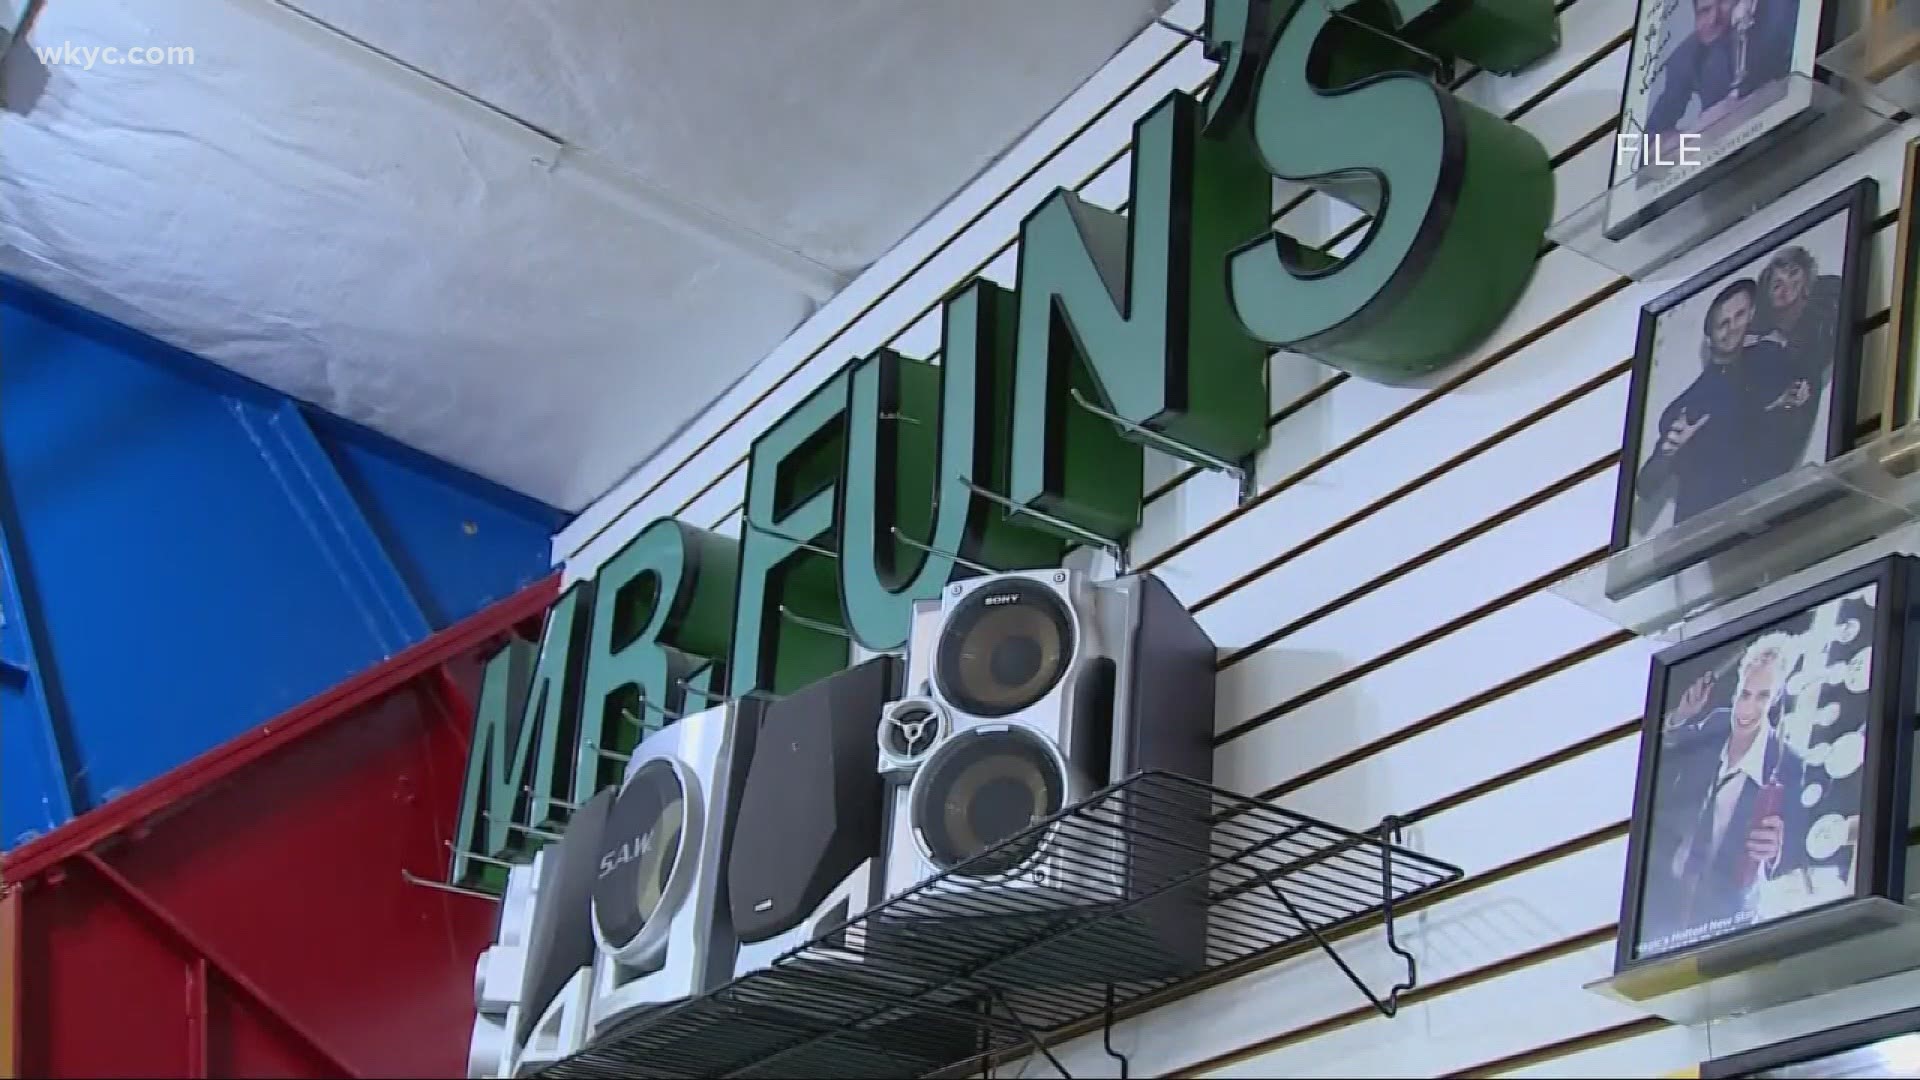 Mr. Funs Costumes in Cuyahoga Falls has been around since 1968.  However this year, they was forced to close their doors for several months due to COVID.